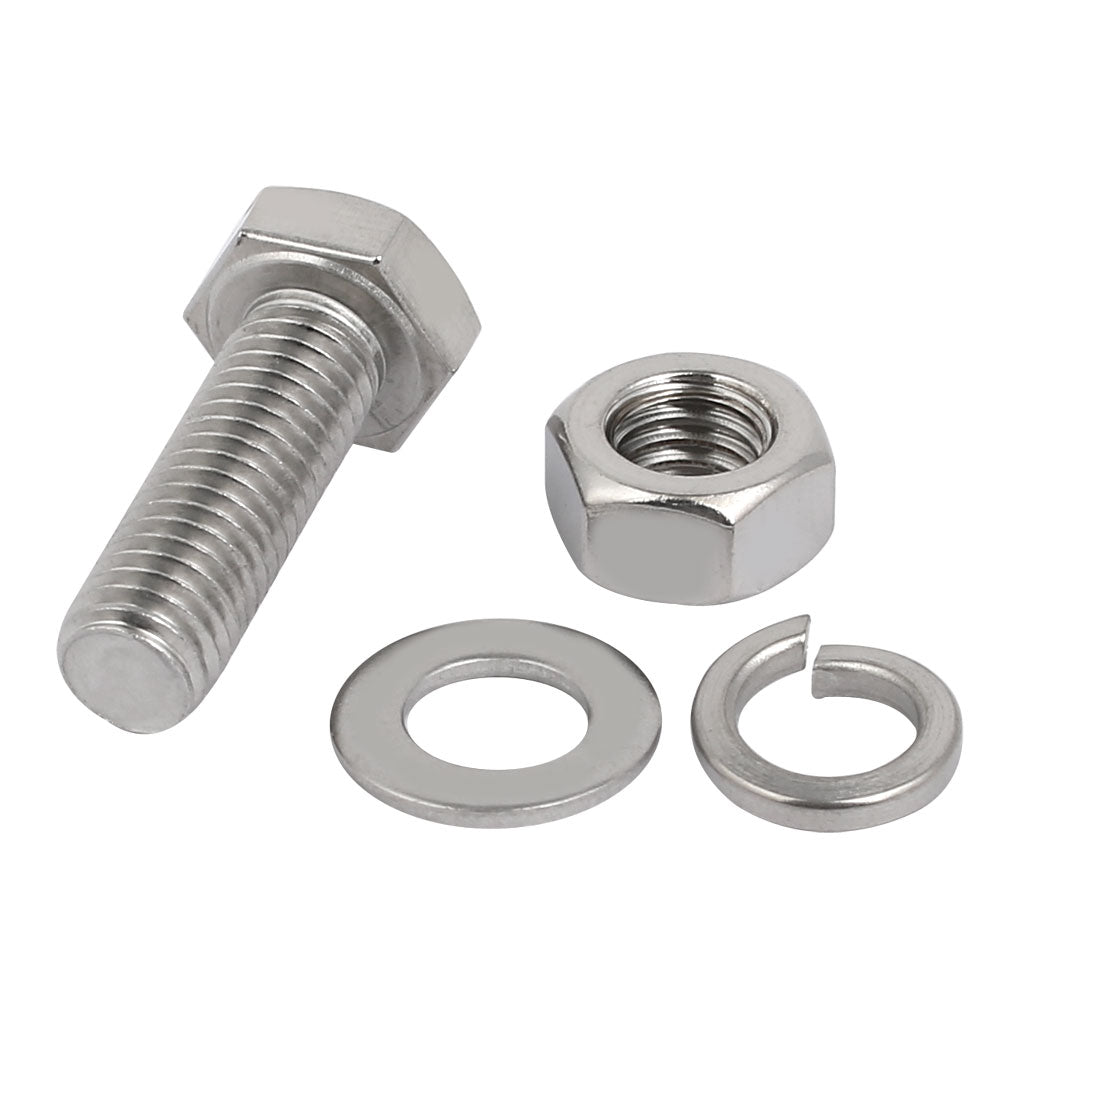 uxcell Uxcell 10 Set M8x30mm 304 Stainless Steel Hex Bolts w Nuts and Washers Assortment Kit